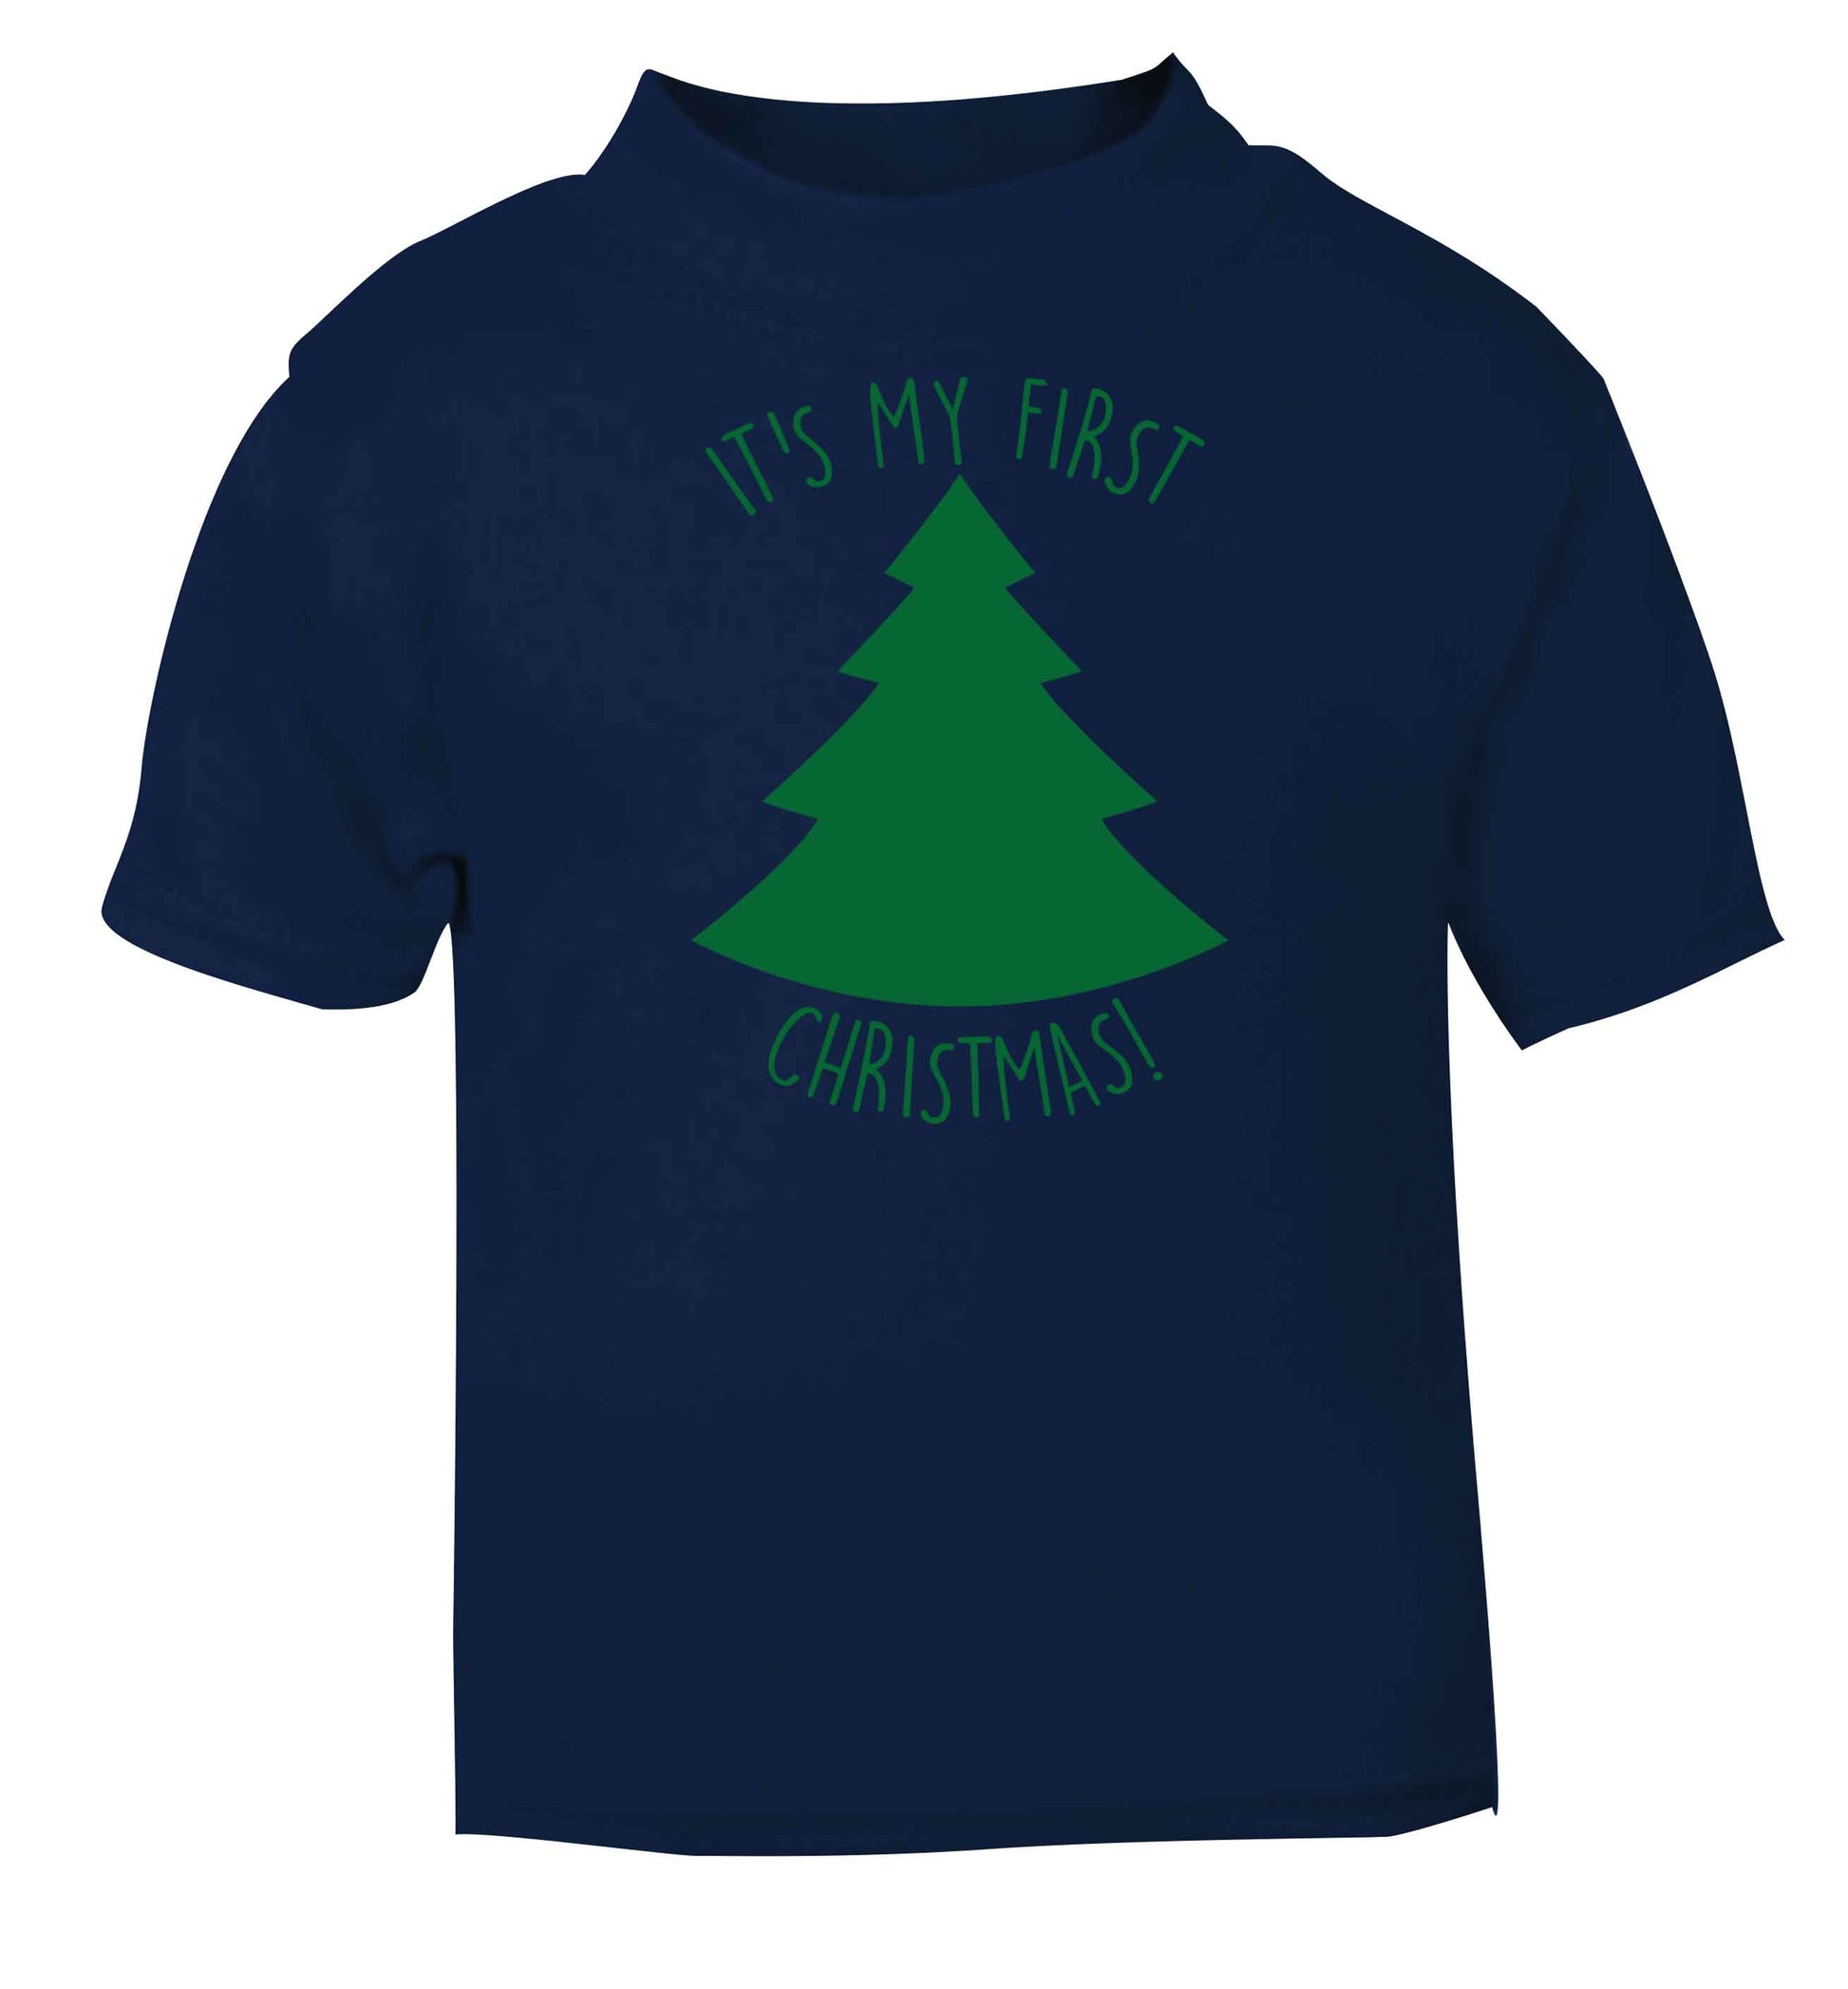 It's my first Christmas - tree navy baby toddler Tshirt 2 Years